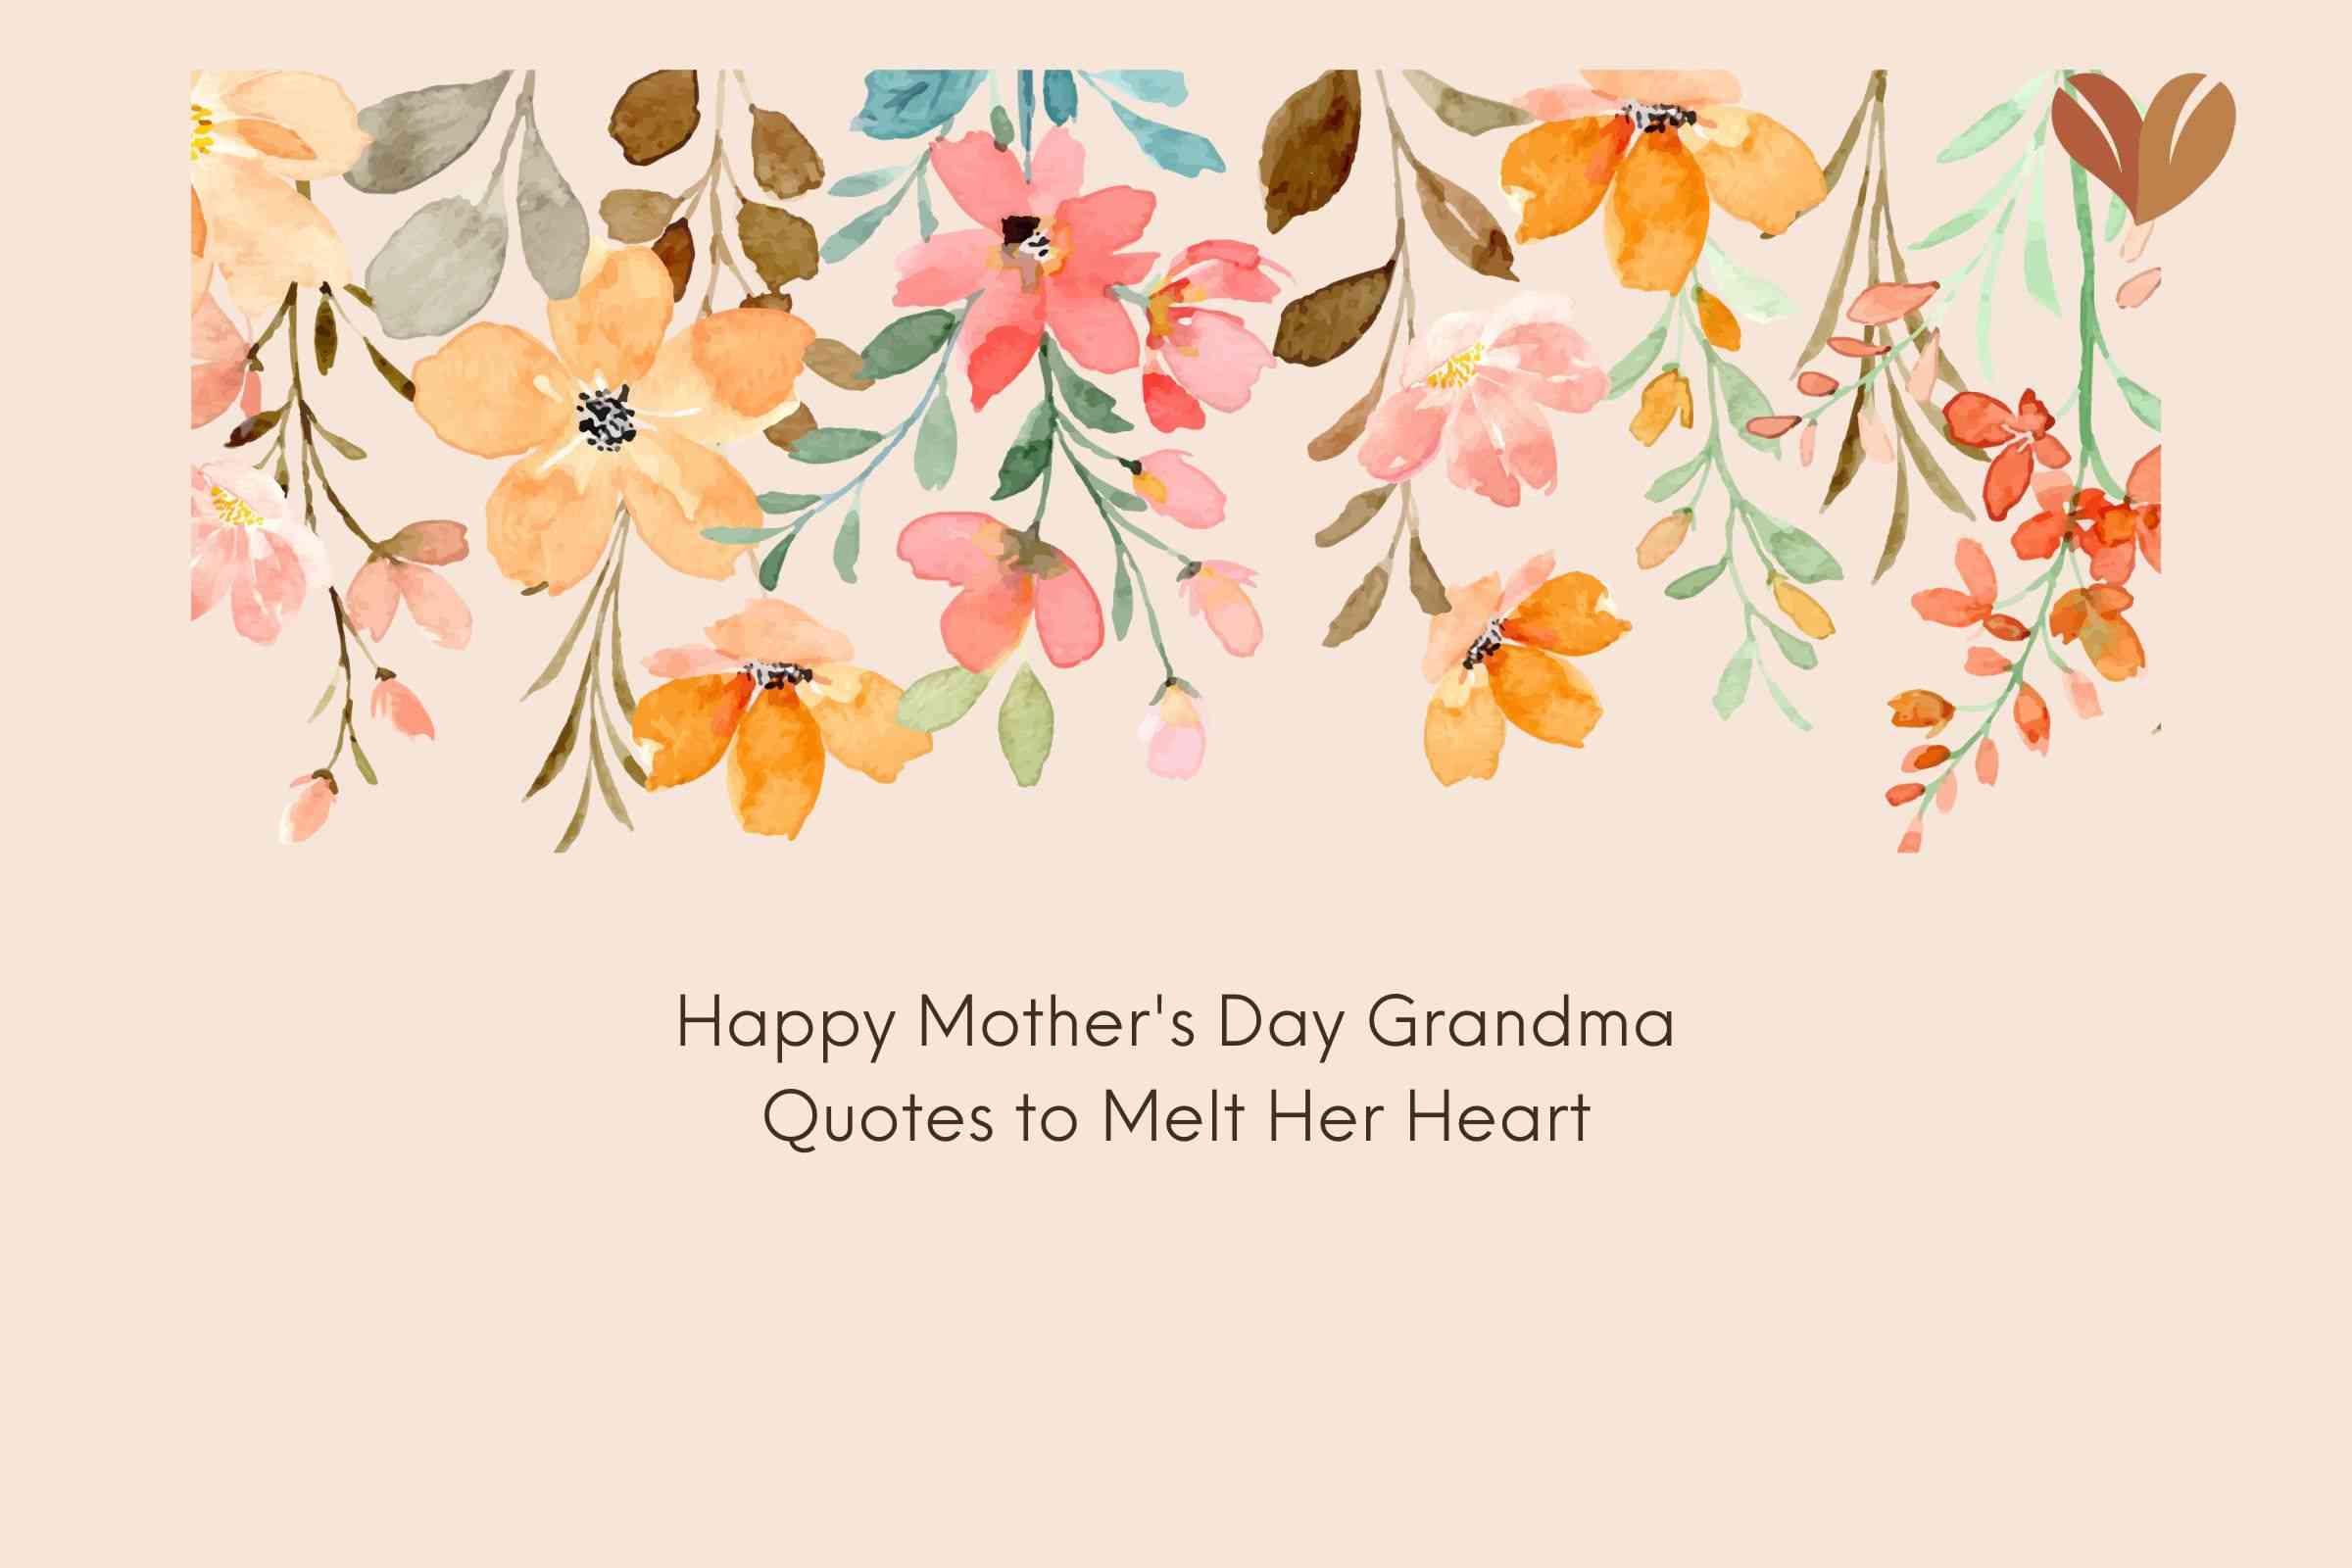 Happy Mother's Day Grandma Quotes for Inspiration Along with Gift Suggestions